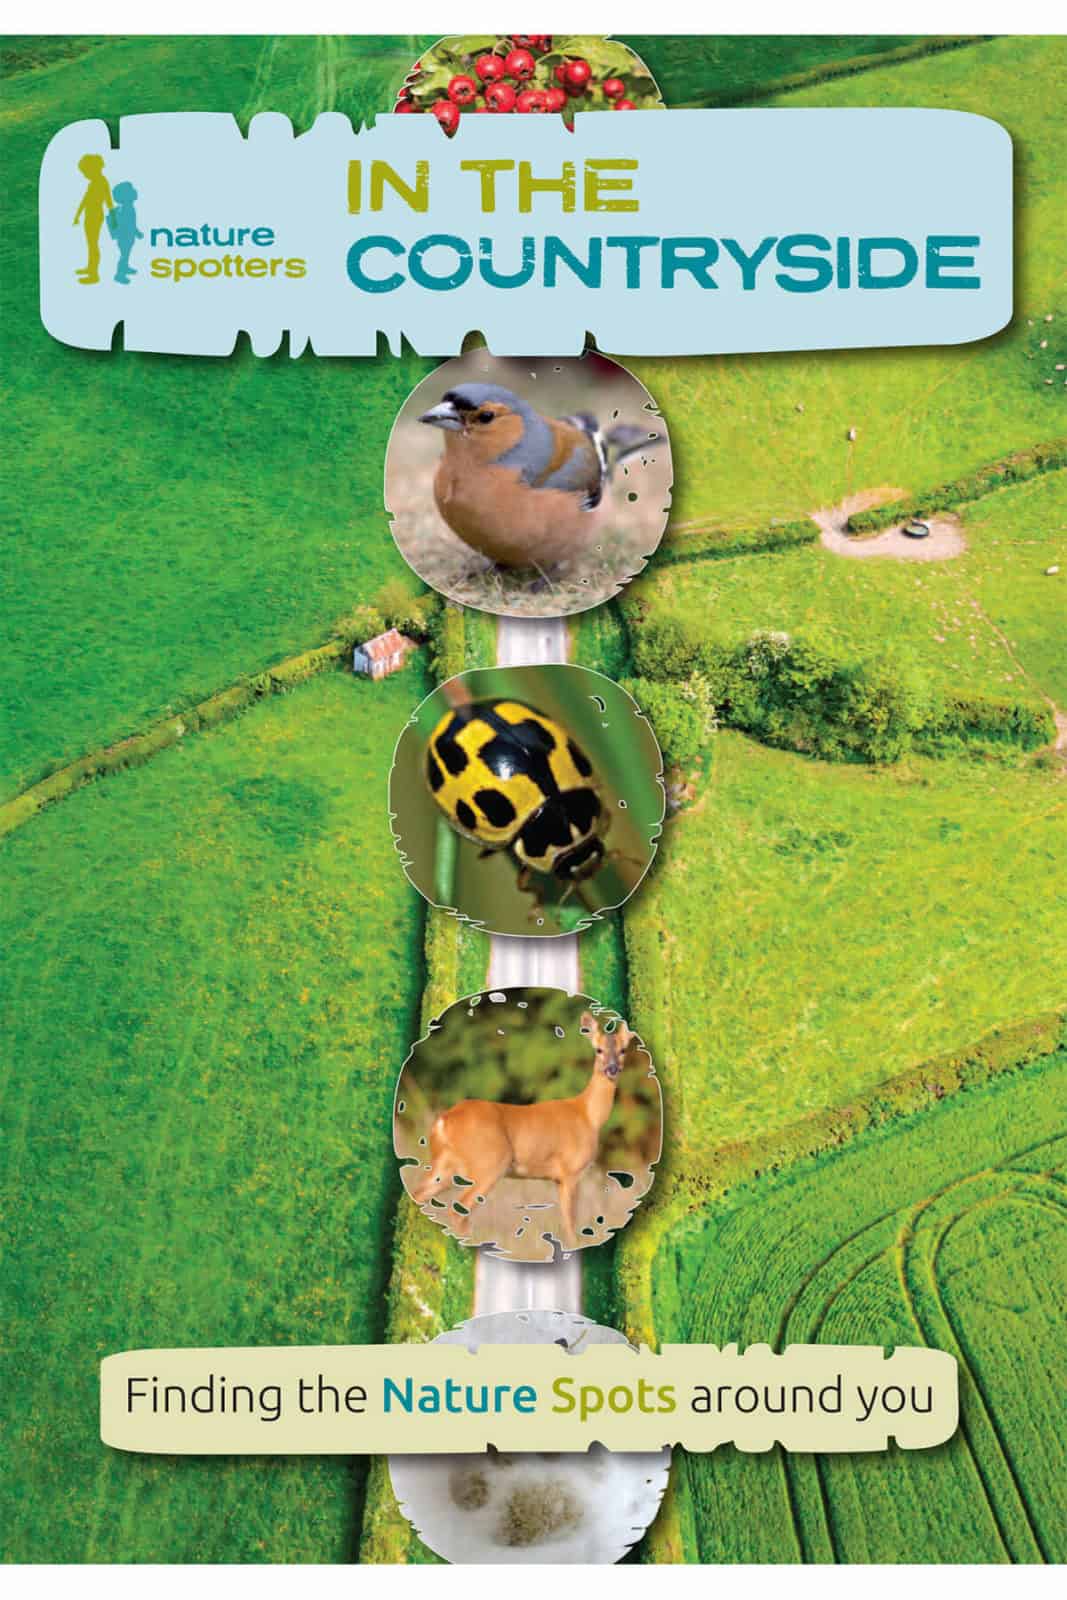 nature spotters countryside book